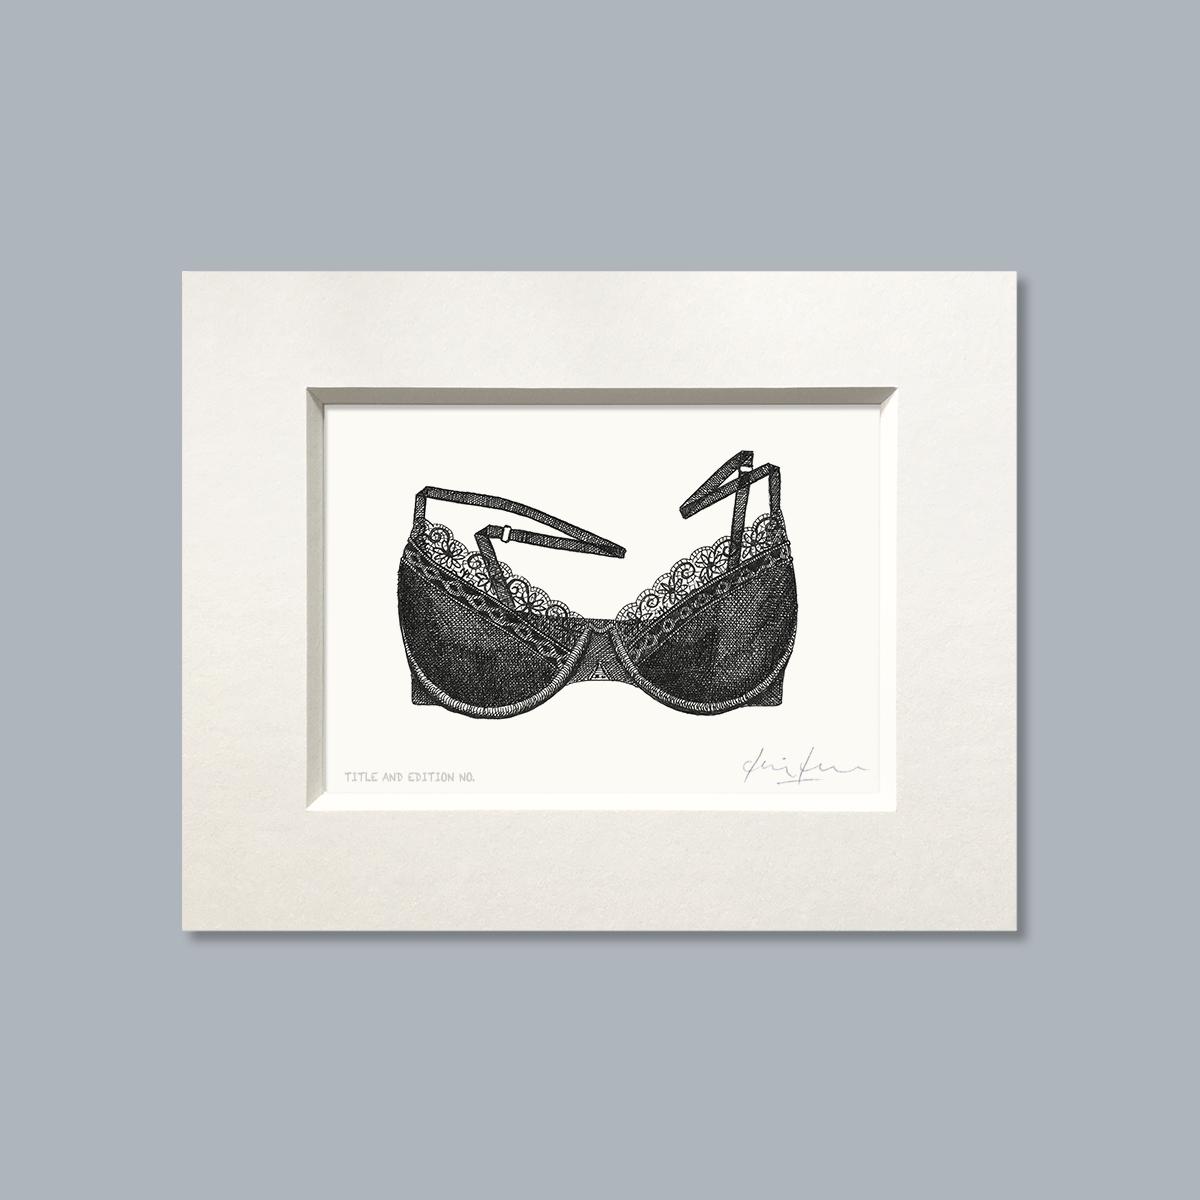 Limited edition print from pen and ink drawing of a lacy bra in a white mount